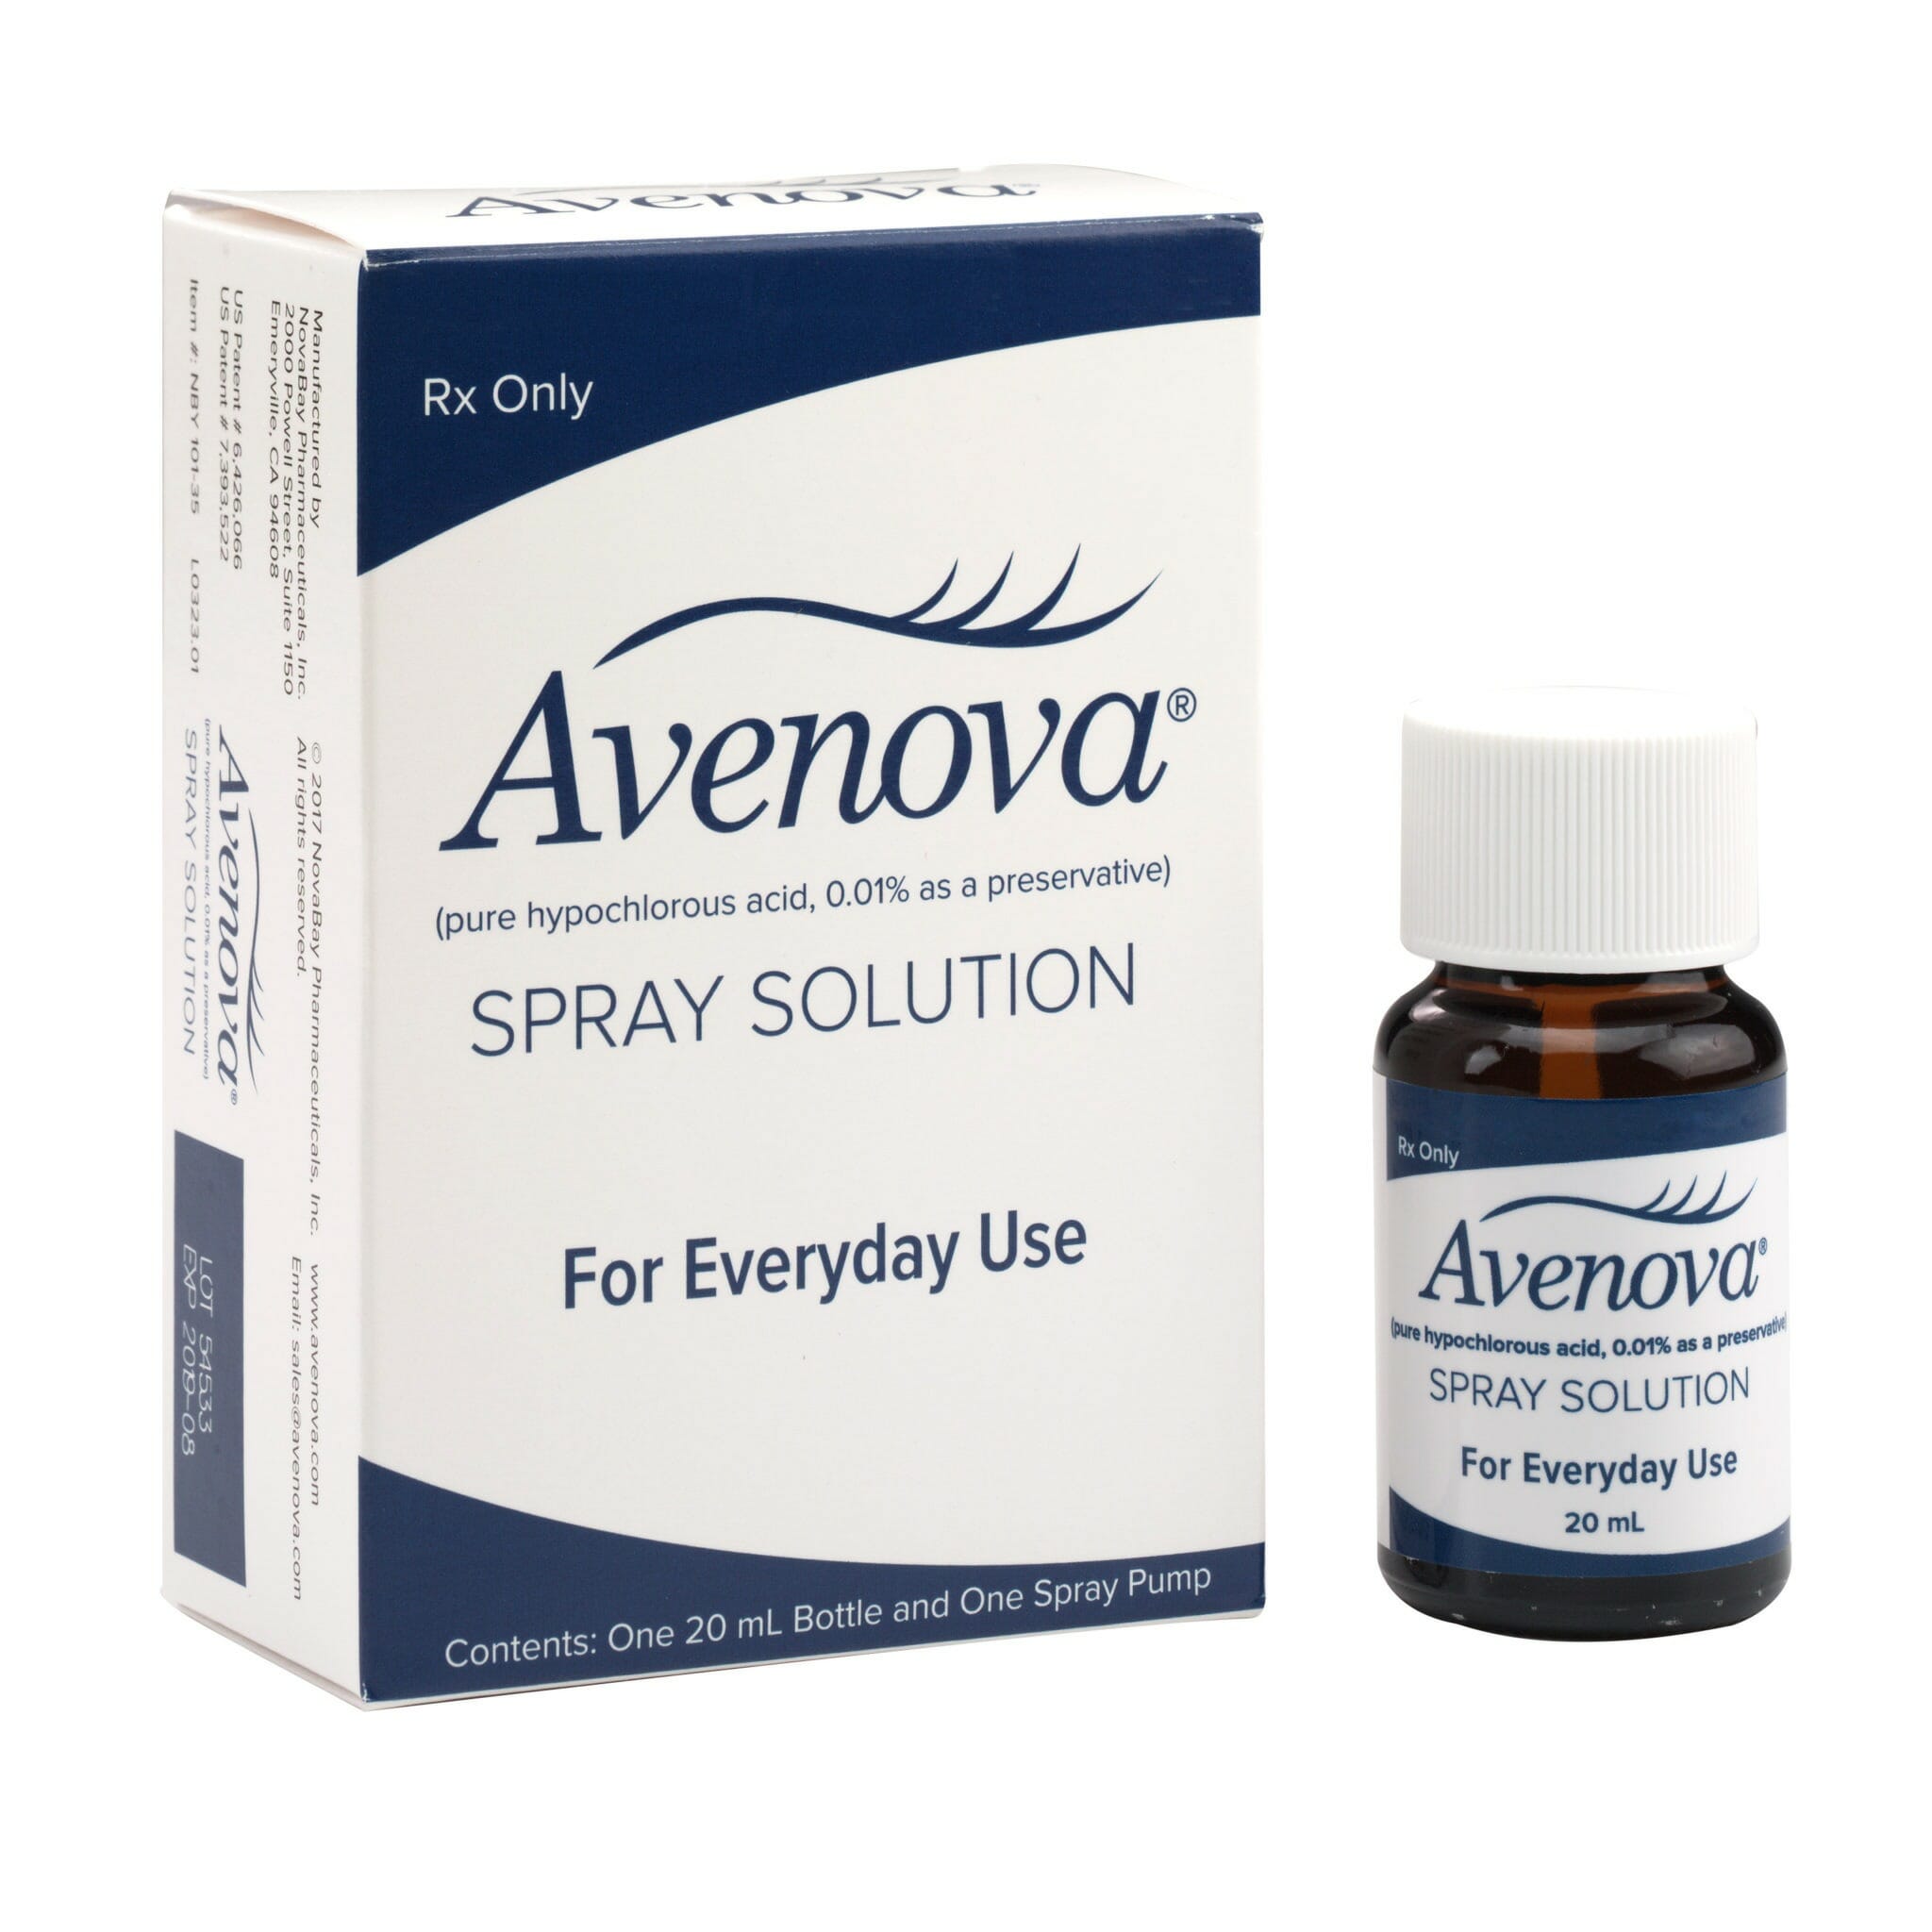 Is Avenova eyelid and eyelash cleanser effective at preventing bacterial eye infections?